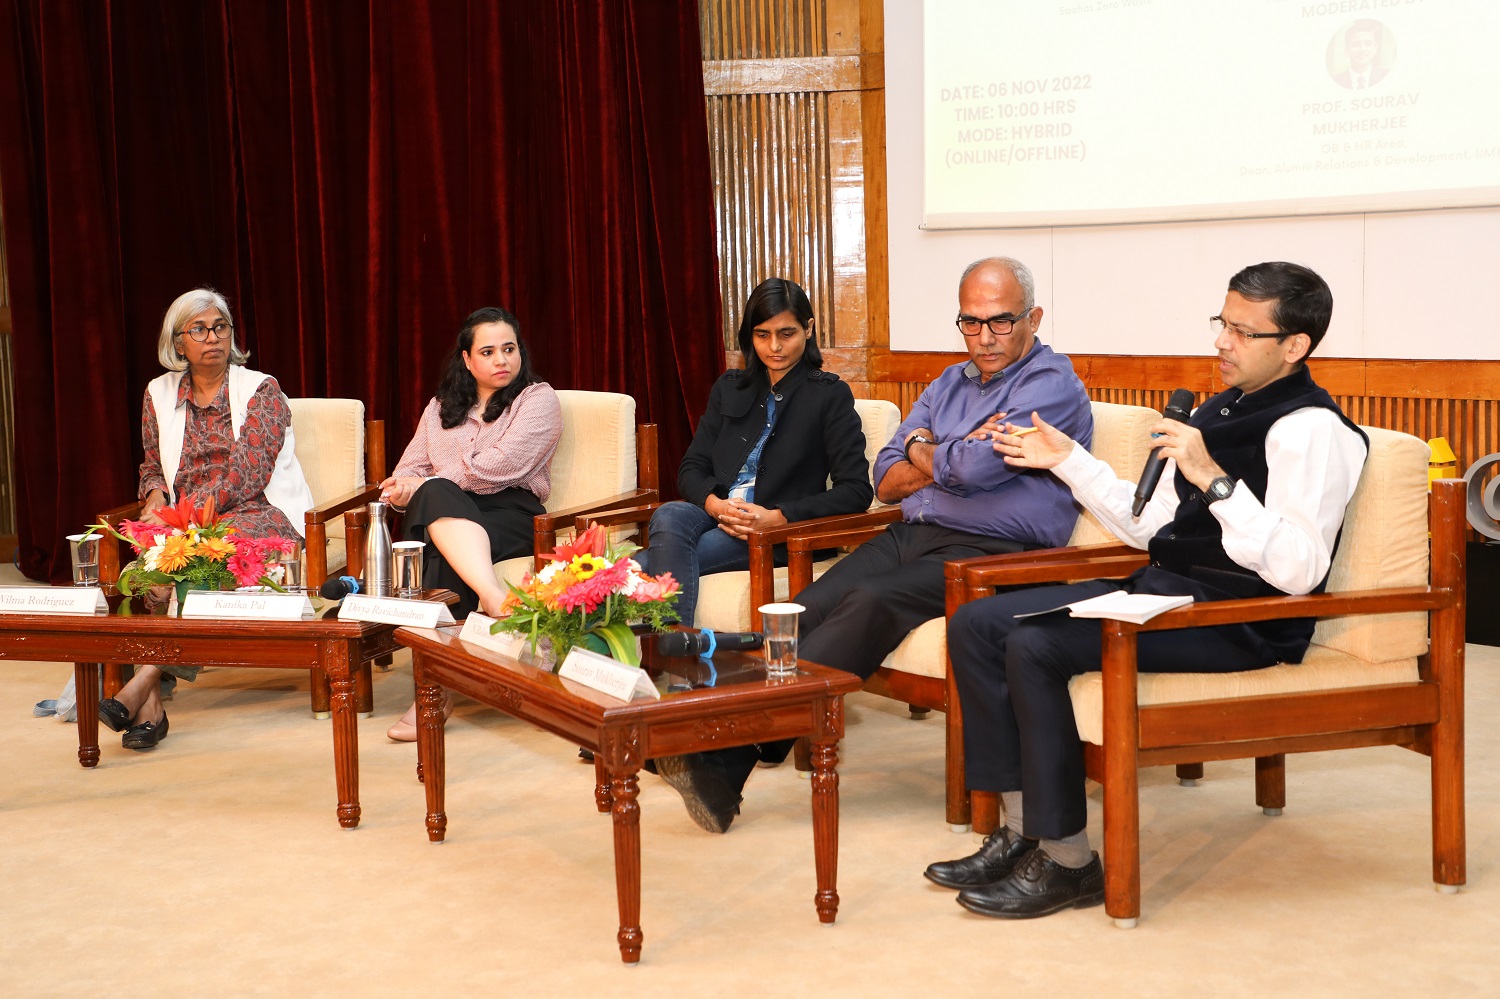 Prof. Sourav Mukherji, Organizational Behavior & Human Resources Management Dean, IIMB, moderates the panel discussion on India’s Sustainability Goals - Are we on track? at Drishti 2022 – the leadership summit hosted by the students of the Post Graduate Programme in Enterprise Management (PGPEM) at IIMB on November 06th 2022. (L-R) Wilma Rodriguez, Founder, Saahas; Kanika Pal, South Asia Head, HUL; Divya Ravichandran, Founder, Skrap; Raj Seelam, Founder, 24mantra.